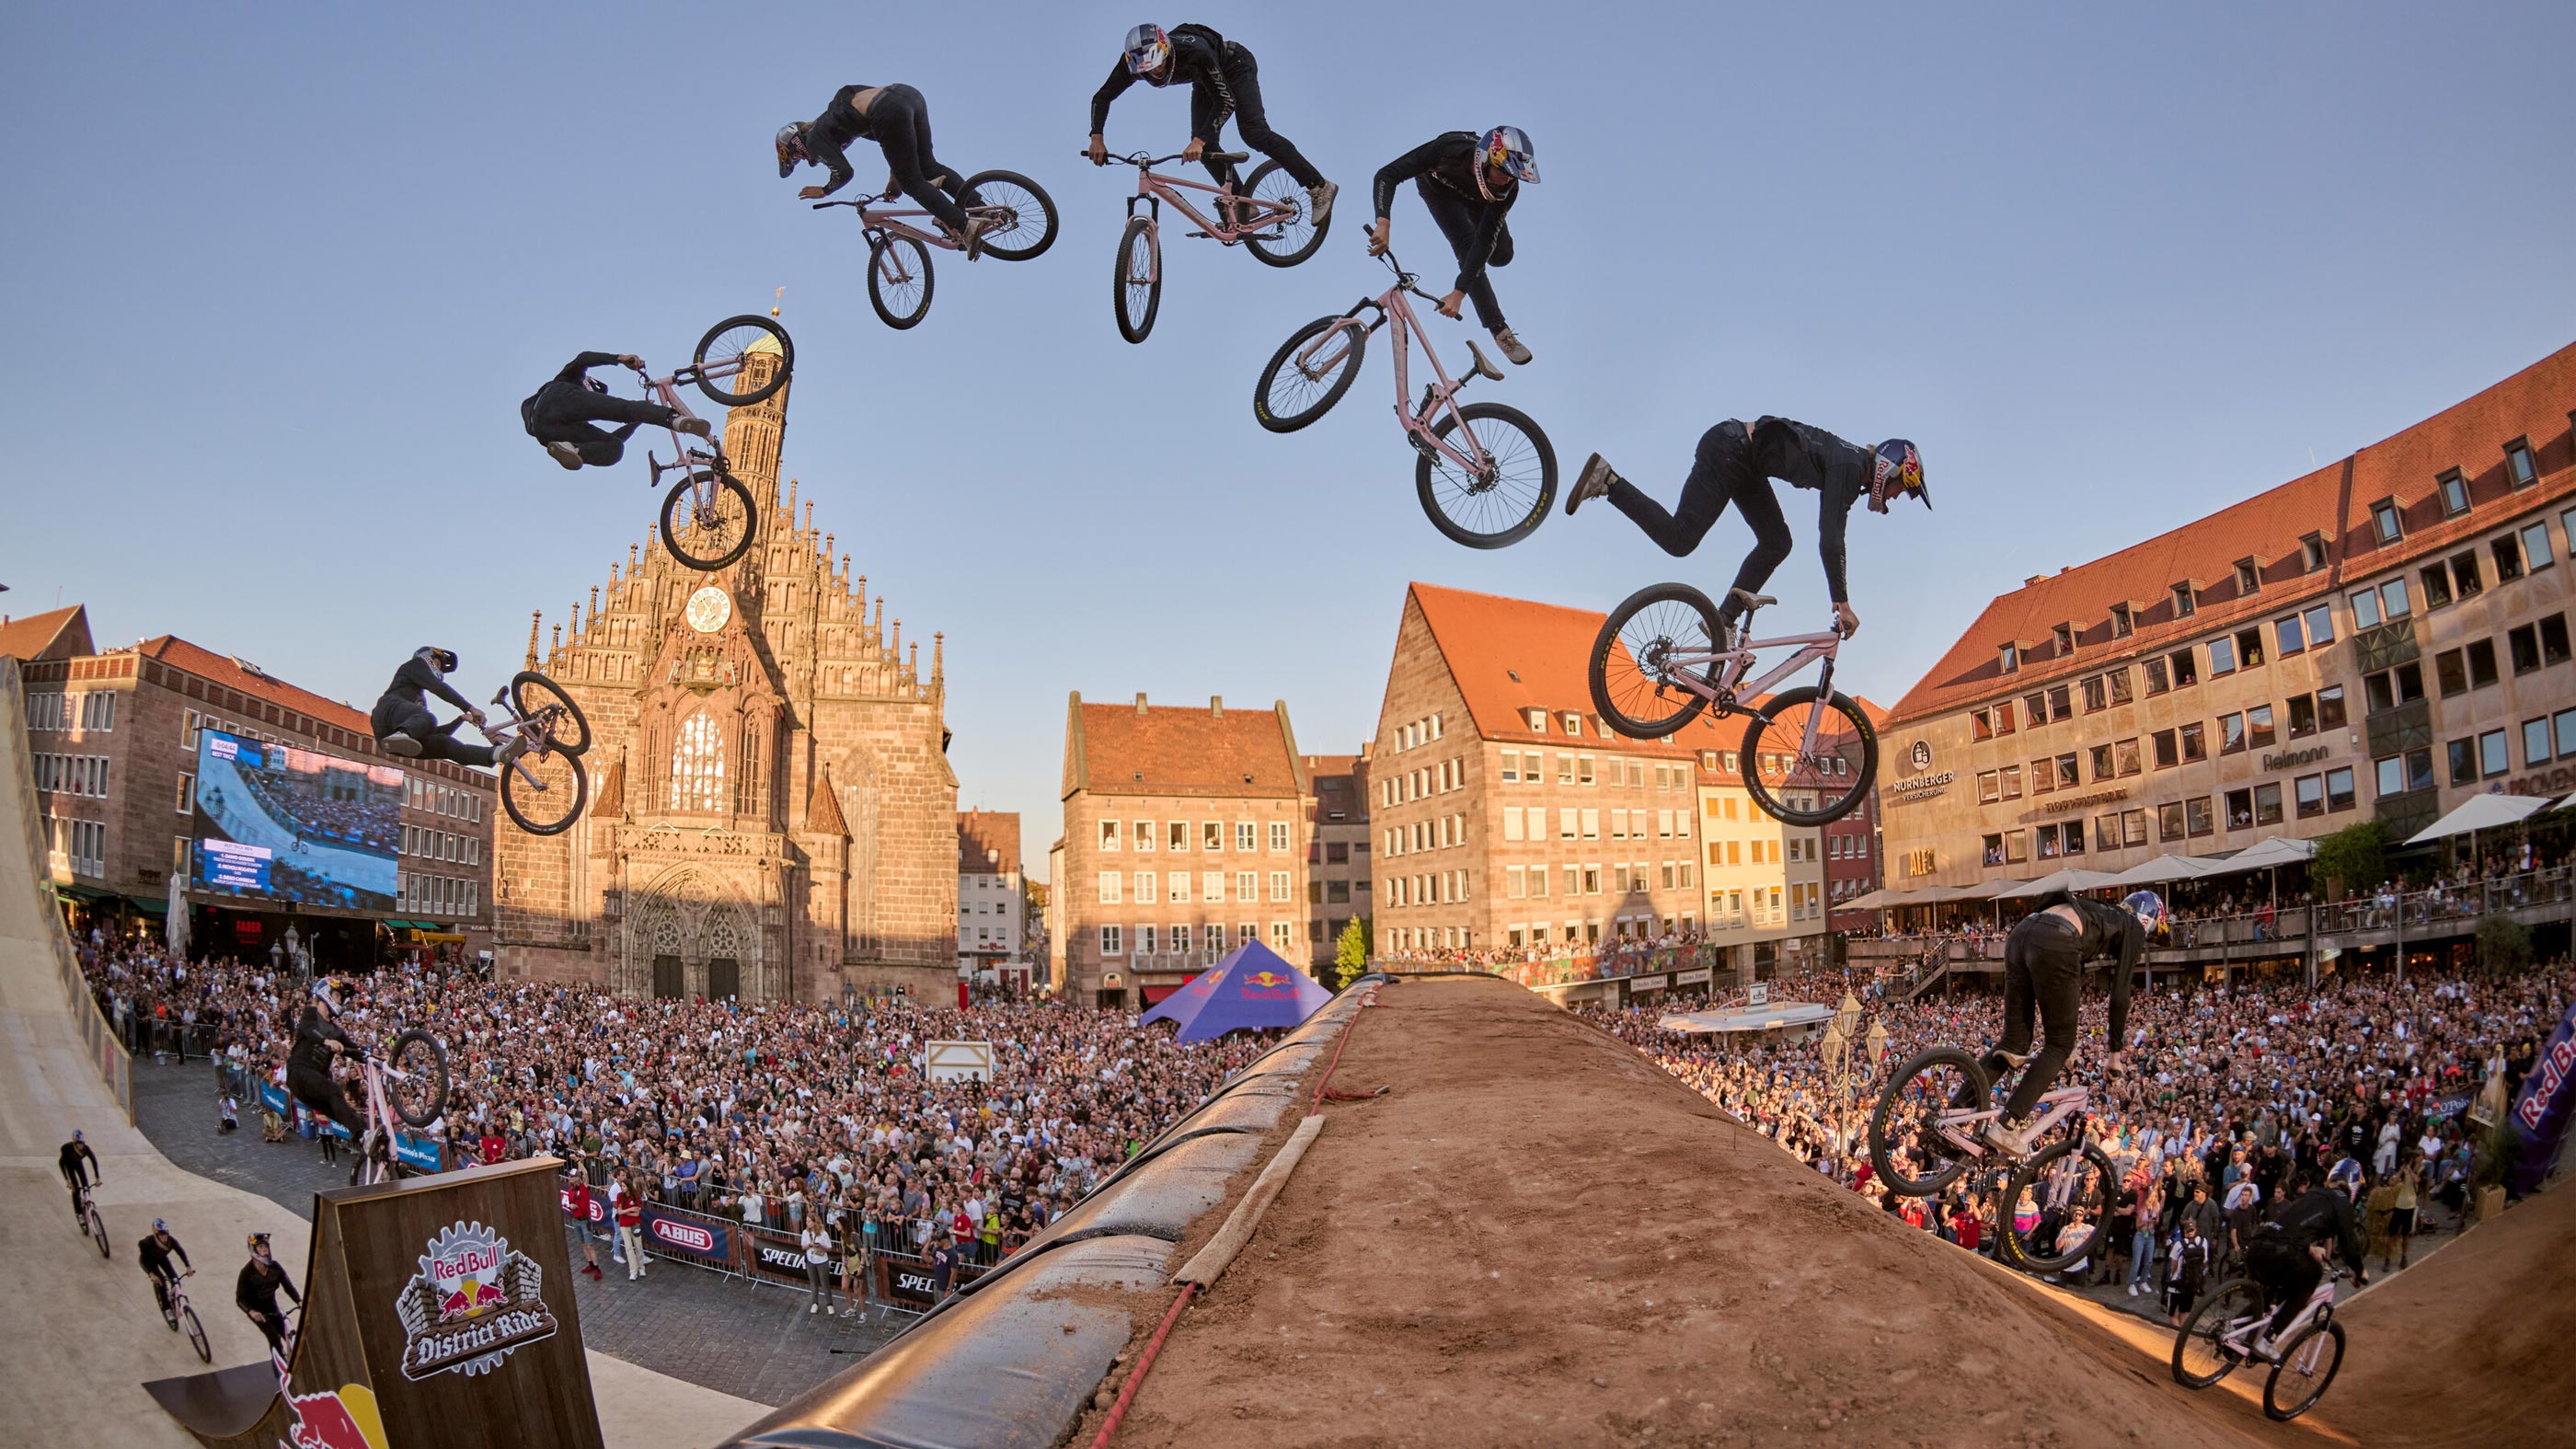 Emil Johansson winning trick (360 tailwhip to barspin to downside tailwhip) during the Red Bull District Ride 2022 Best Trick in Nuremberg, Germany on September 2, 2022 